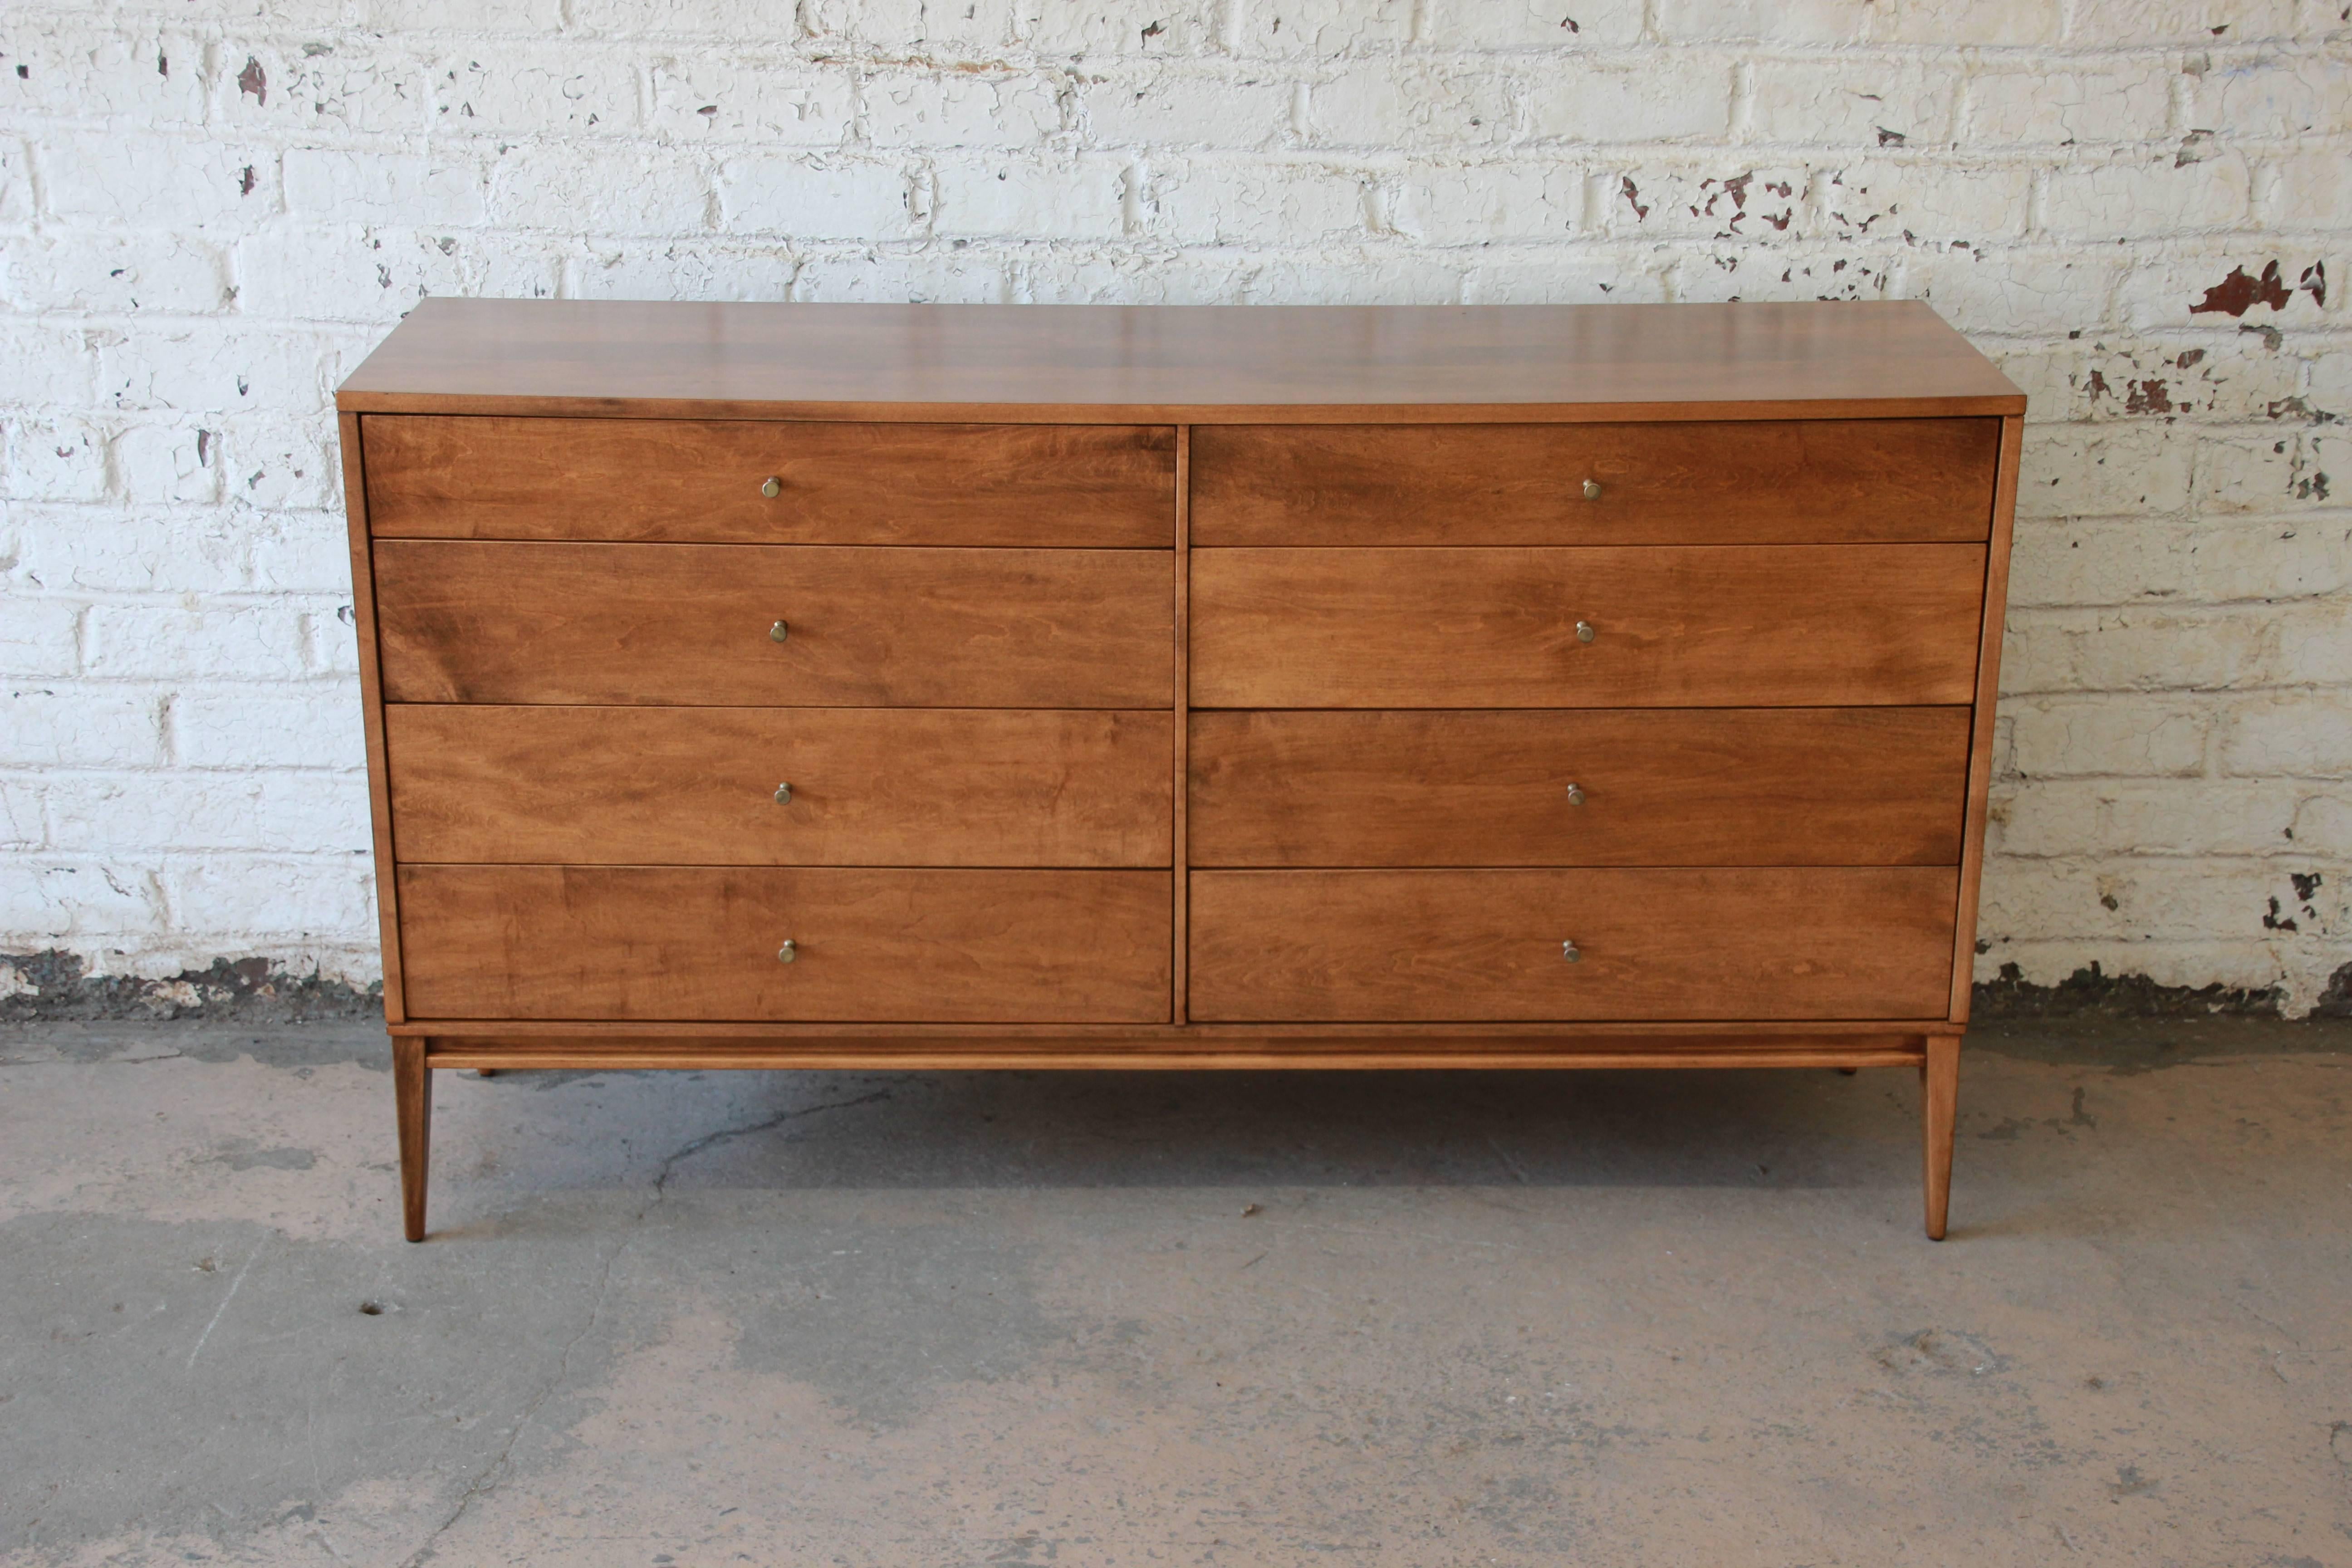 An exceptional eight-drawer dresser or credenza by iconic designer Paul McCobb for the Planner Group by Winchendon. The dresser features stunning wood grain and sleek Mid-Century lines. It is well constructed from solid maple and offers ample room